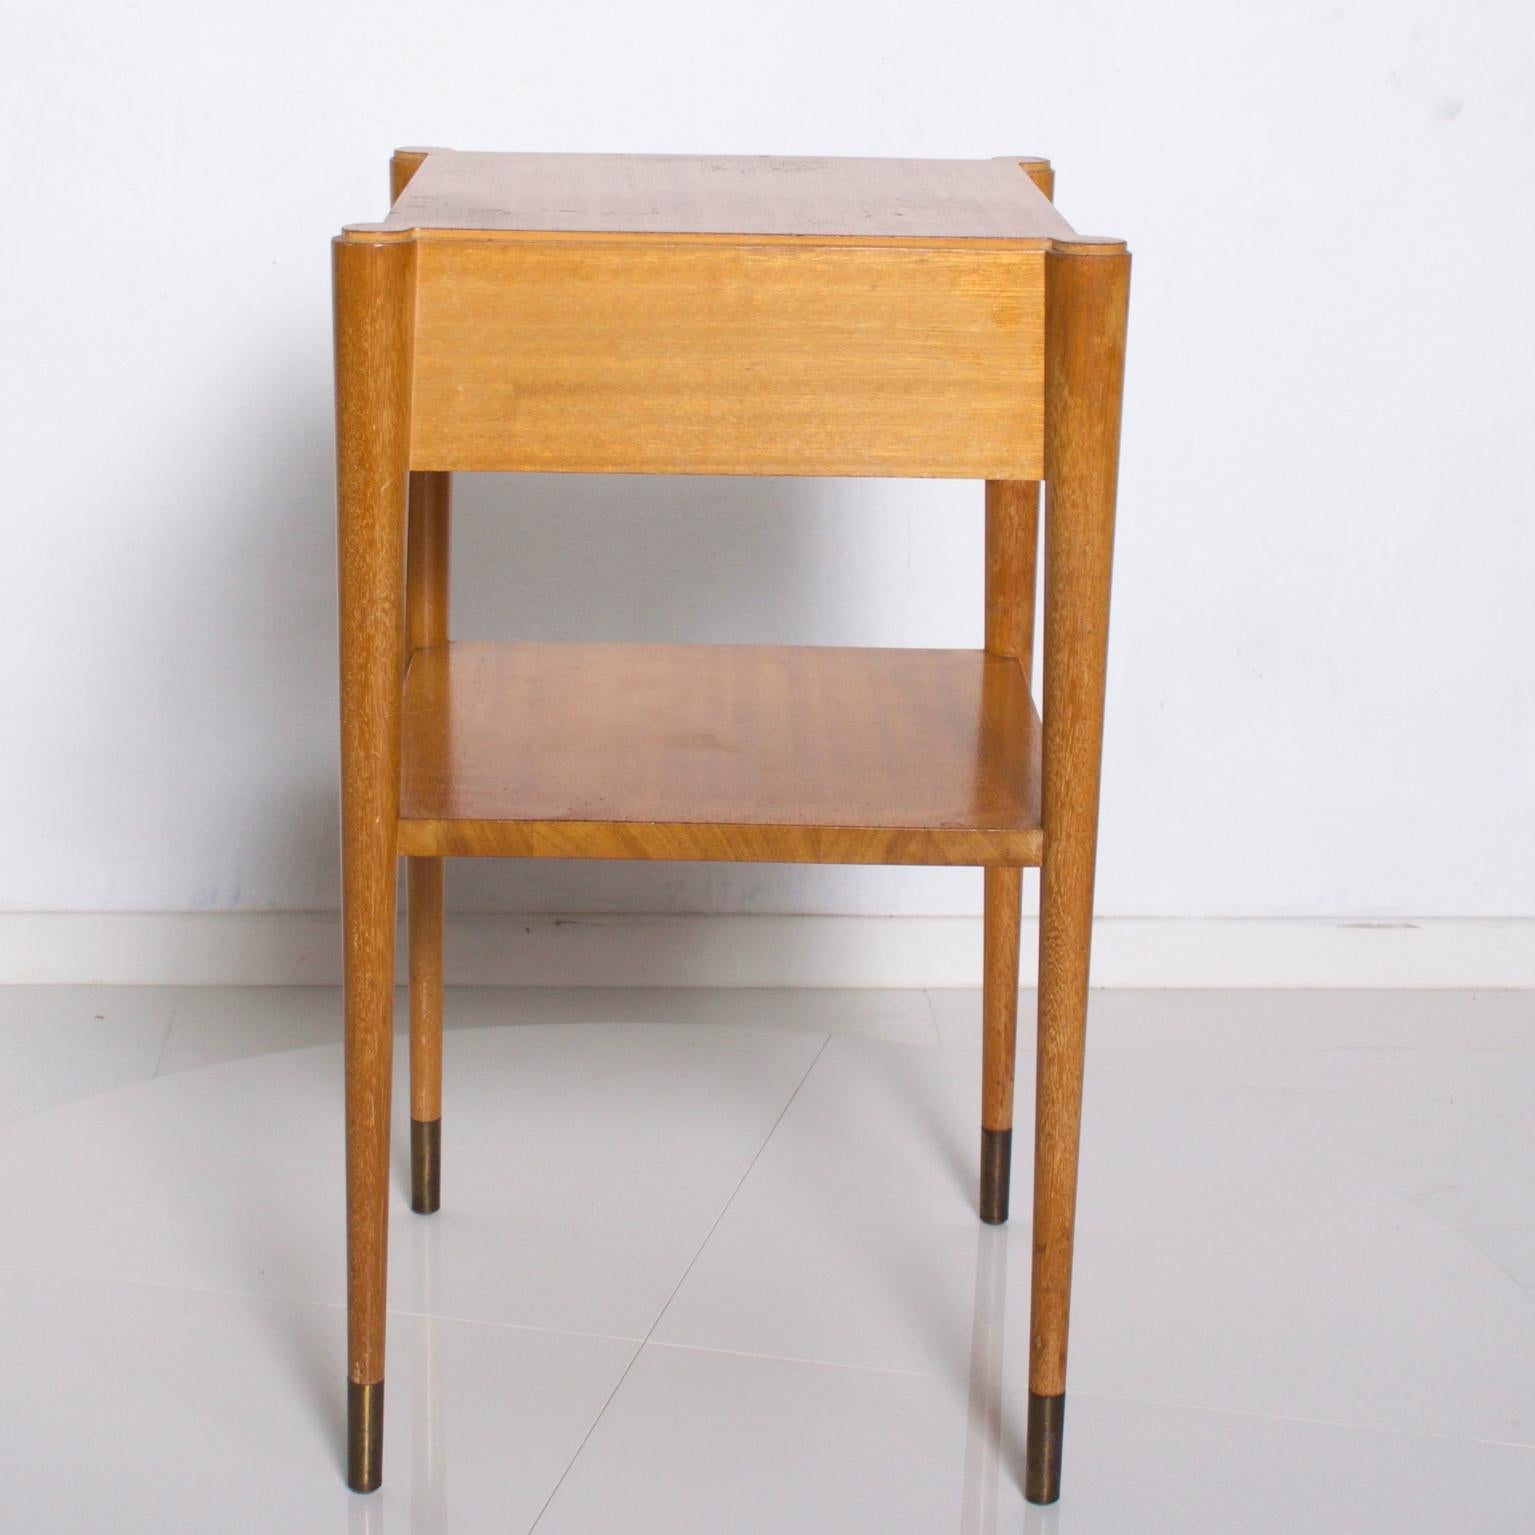 Mid-20th Century Paul Frankl Blonde Mahogany Art Deco Side Table by Brown Saltman 1950s